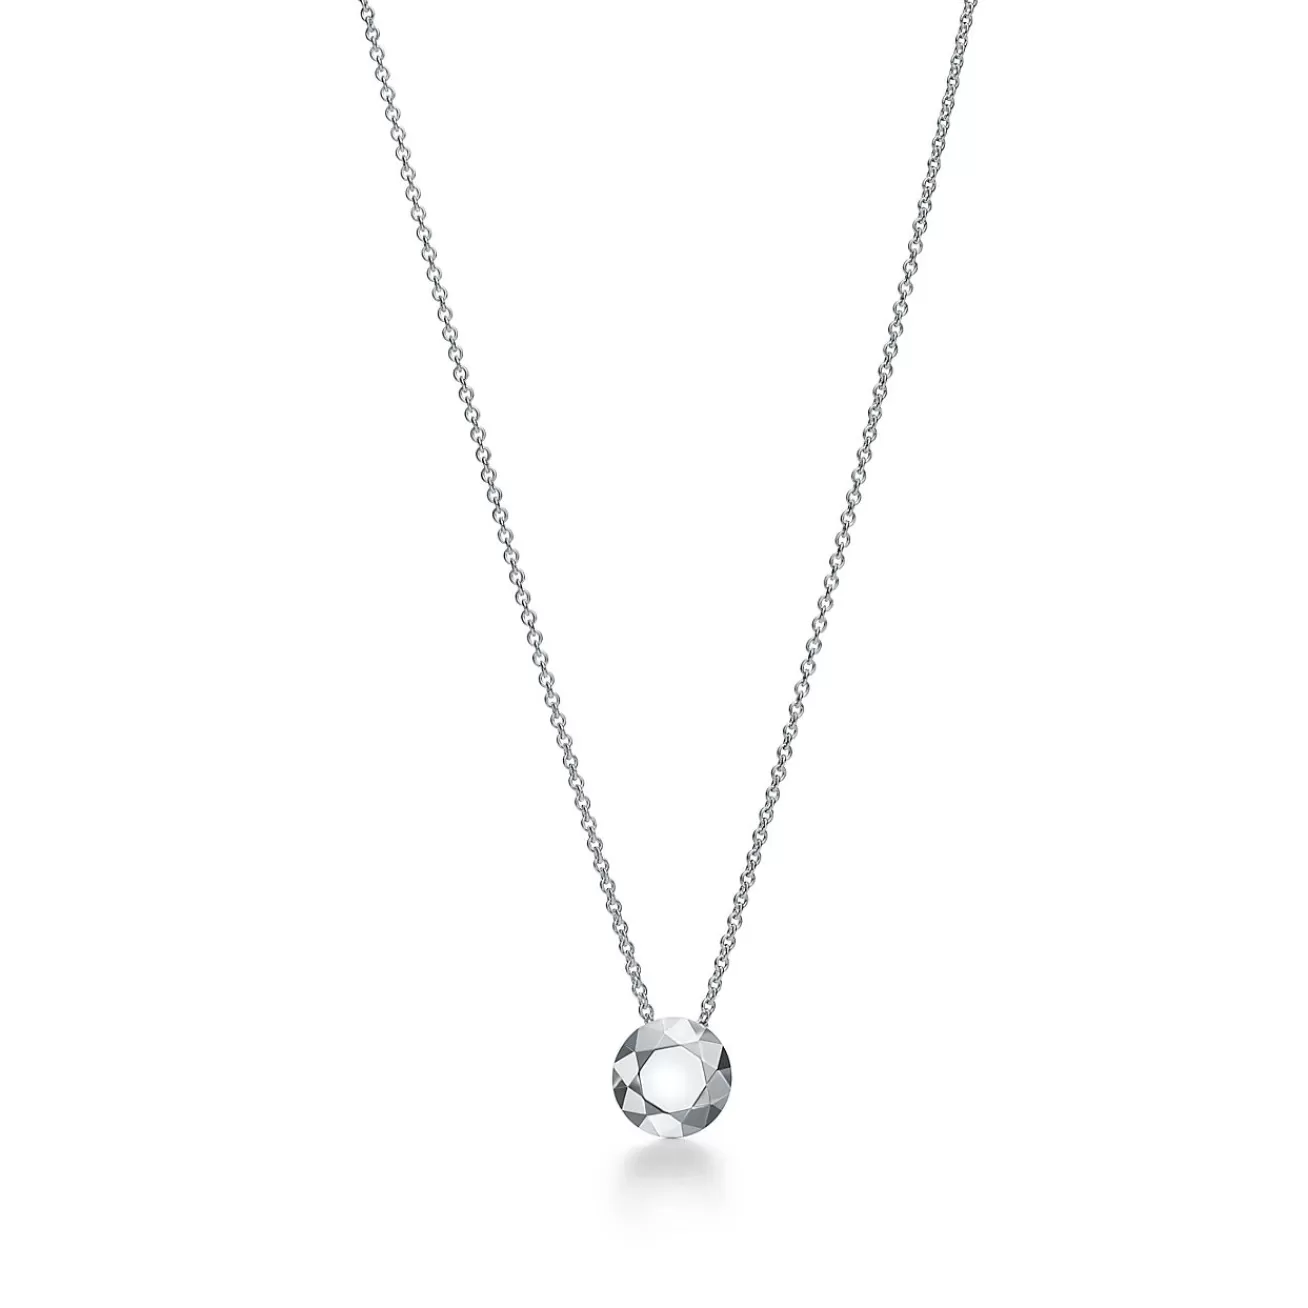 Tiffany & Co. Elsa Peretti® 2 Carat Faceted Pendant in Silver | ^ Necklaces & Pendants | Sterling Silver Jewelry